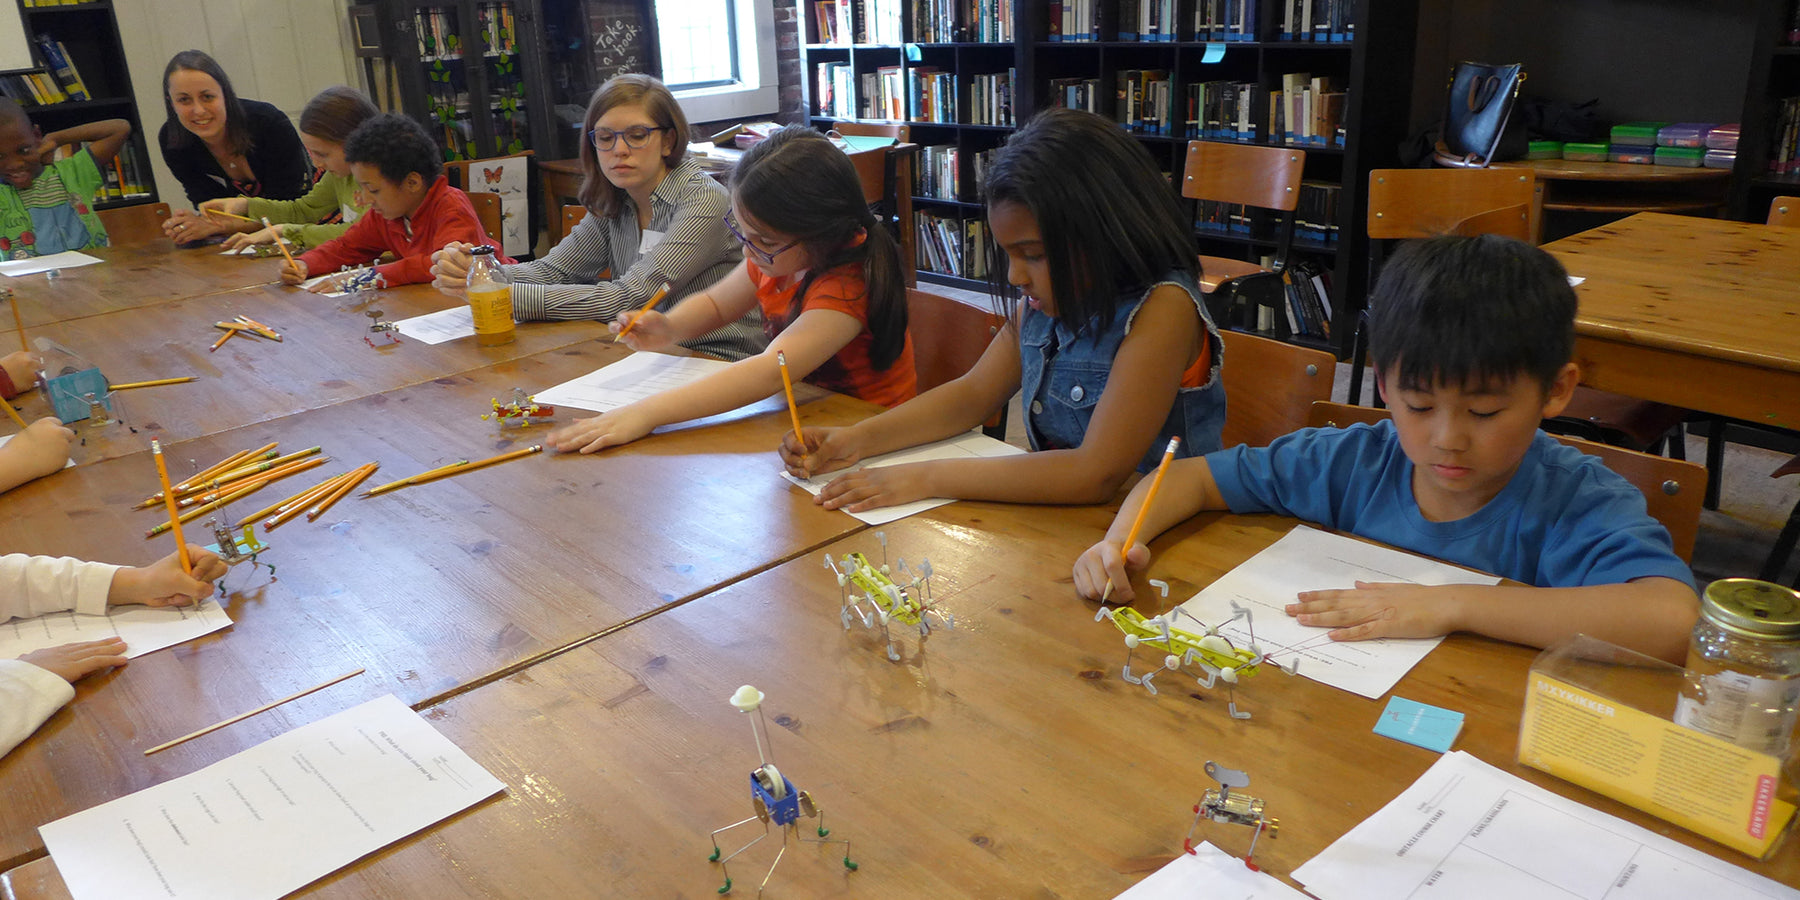 A BUG’S WORLD: KIKKERLAND SPONSORS A CREATIVE WRITING AND CRAFT WORKSHOP FOR STUDENTS